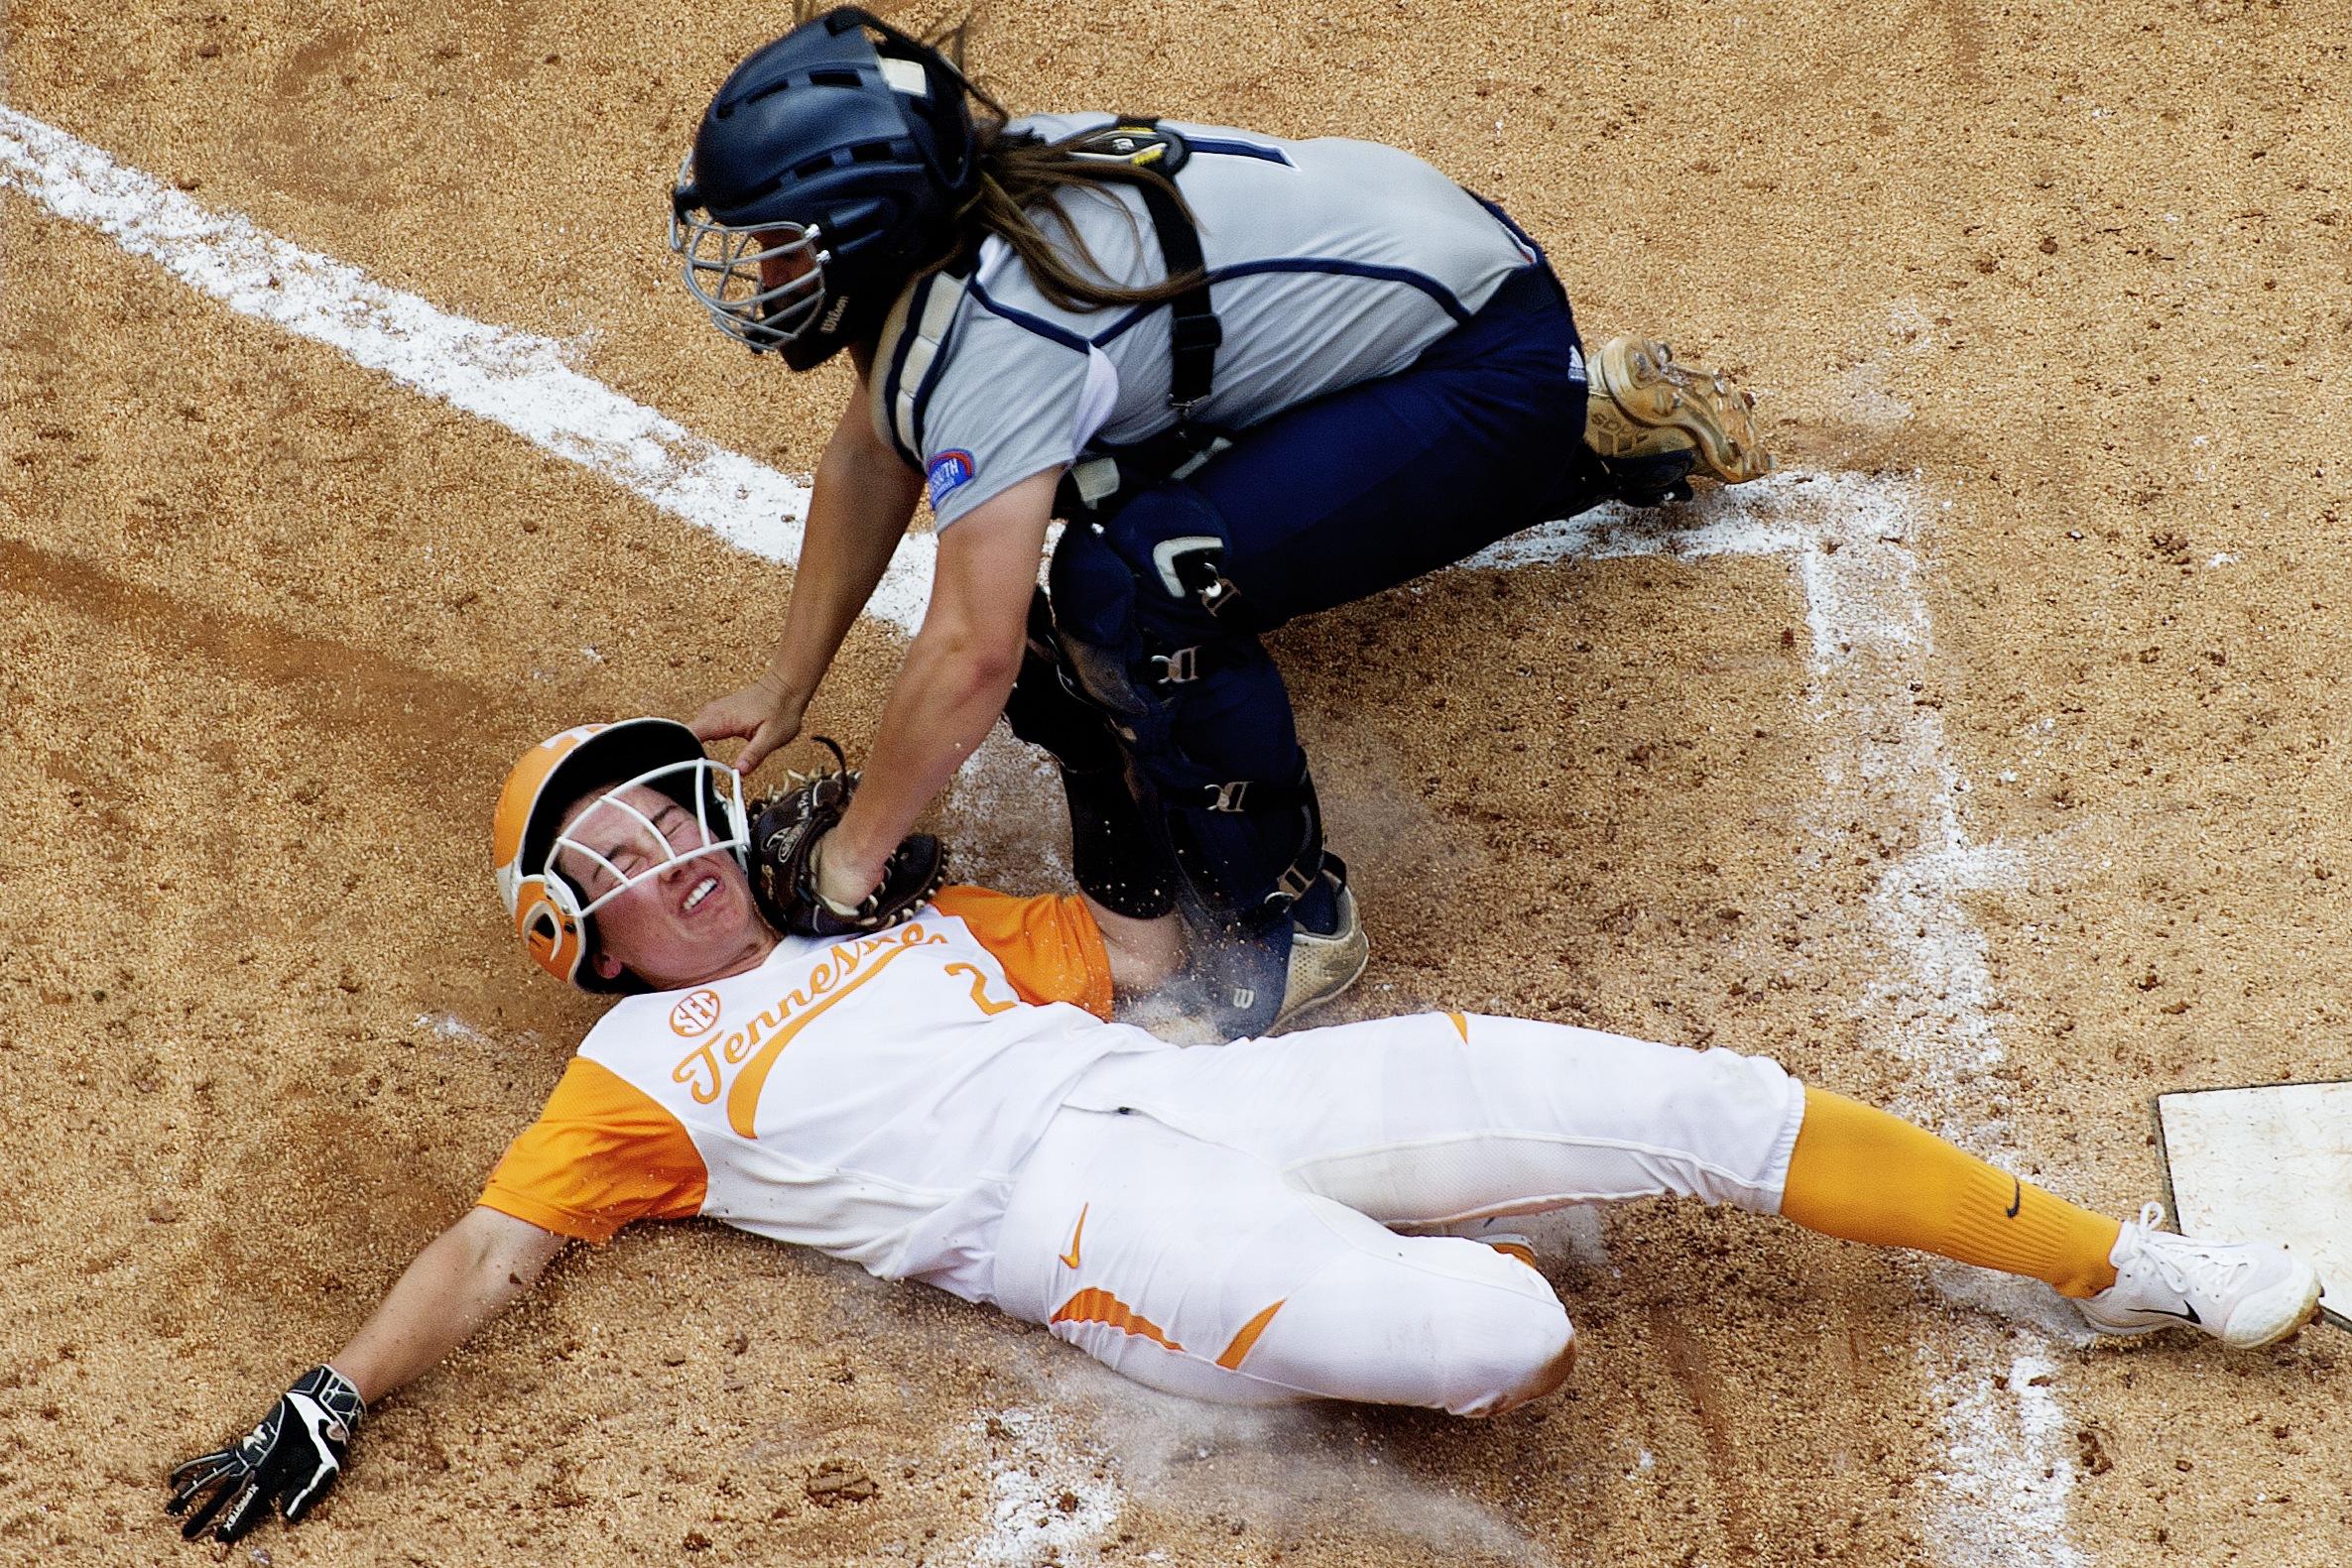  Tennessee’s Jenna Holcomb (2) slides into home as Longwood’s Kaylynn Batten (1) tags her out during a game between Tennessee and Longwood. 